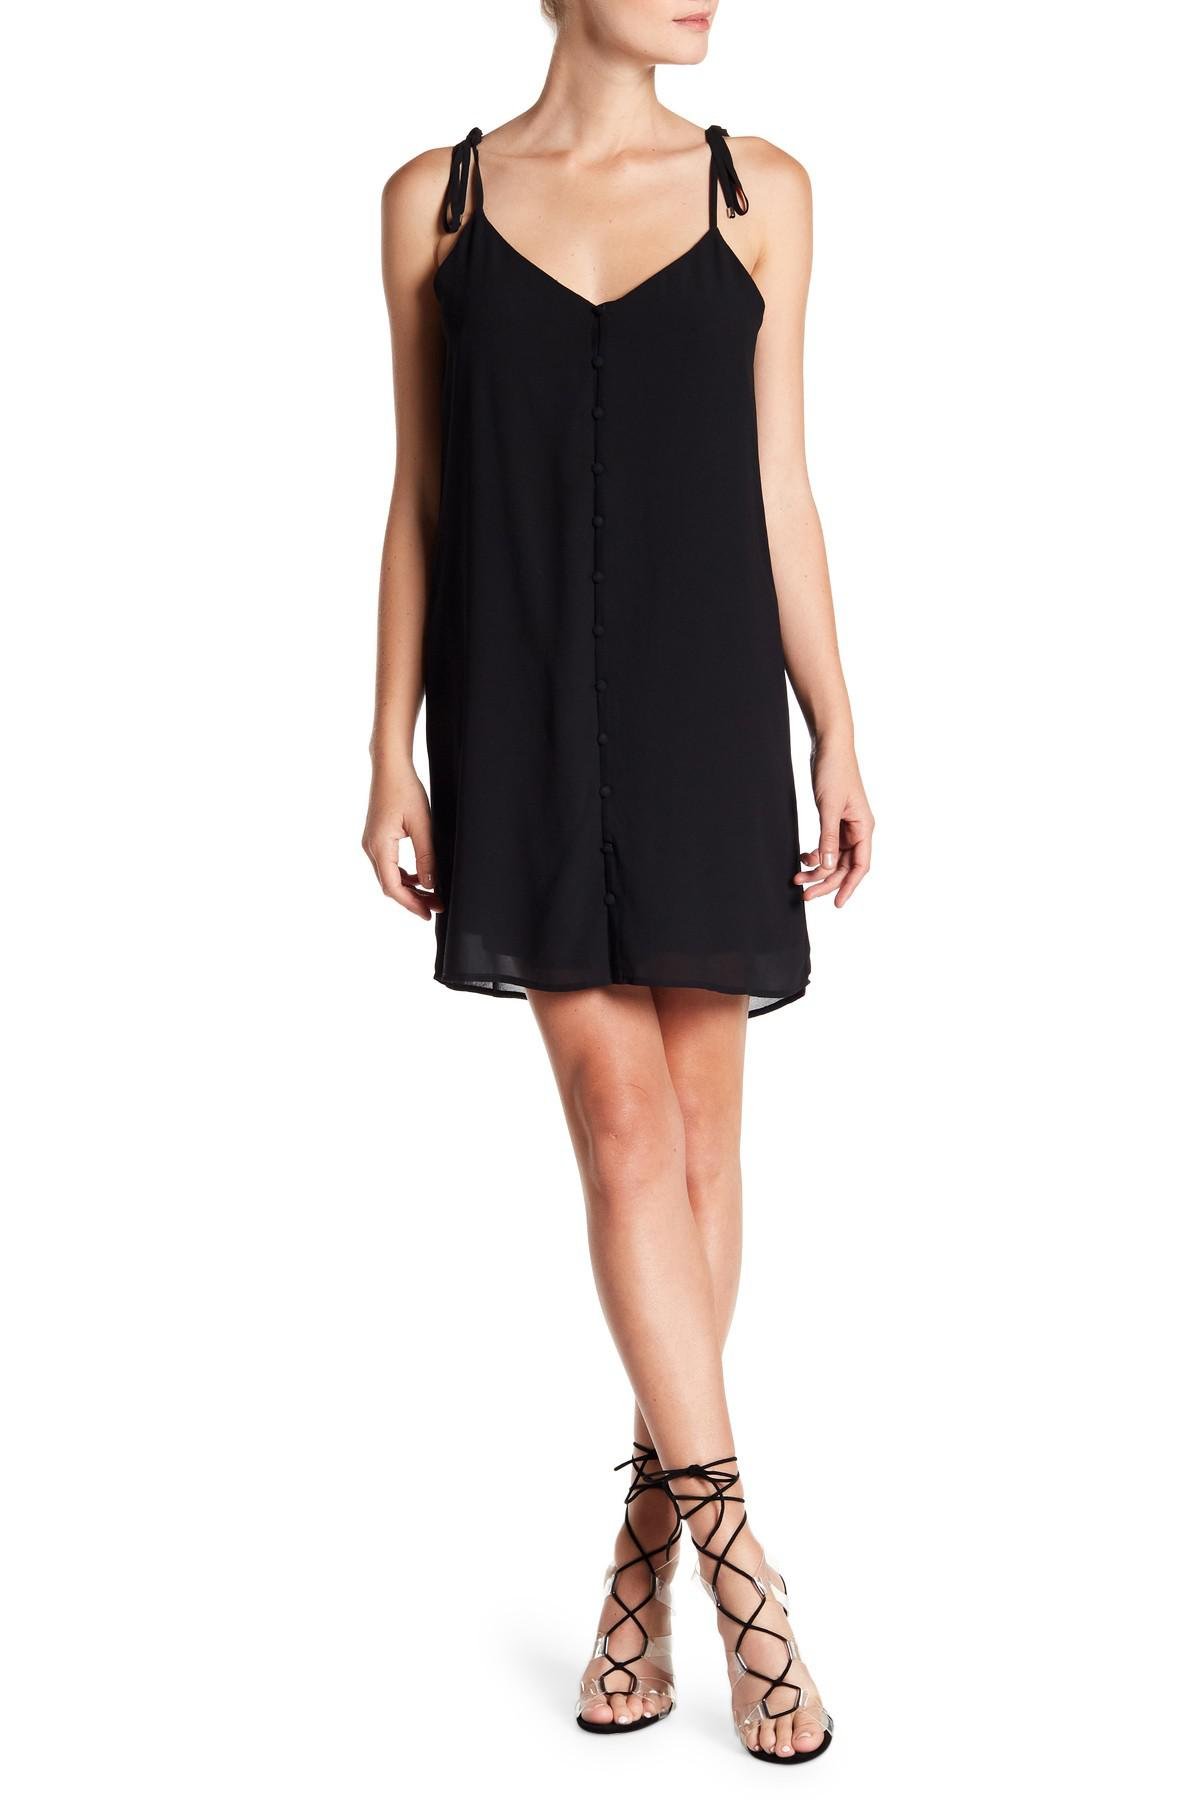 Naked Zebra Synthetic Button Down Dress in Black - Lyst